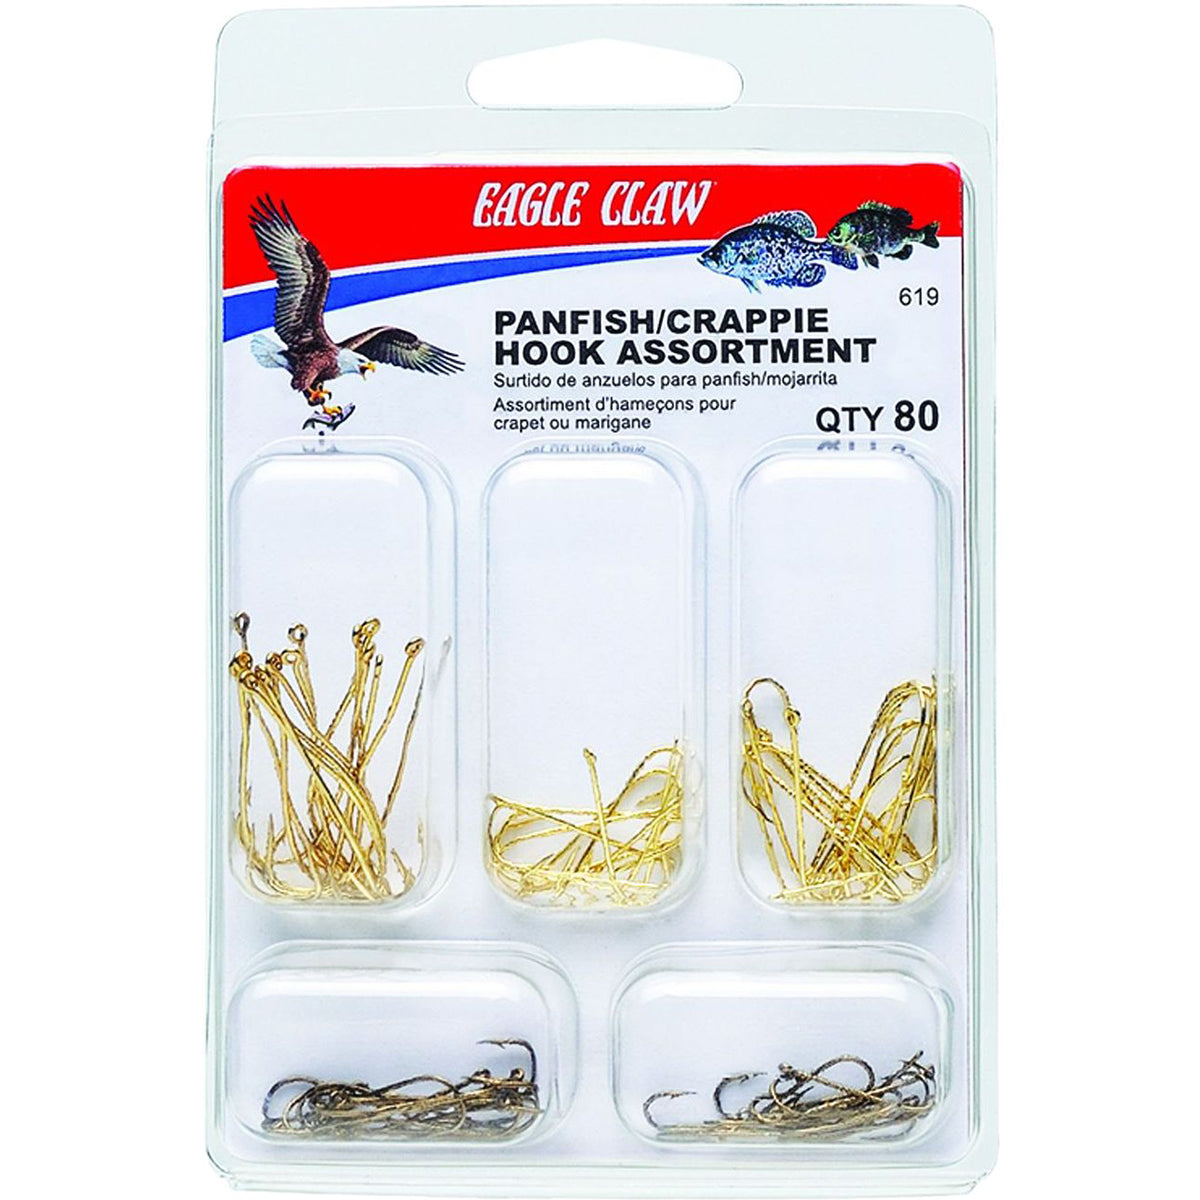 Eagle Claw Crappie/Bream Assorted Hooks Fishing Kit Eagle Claw